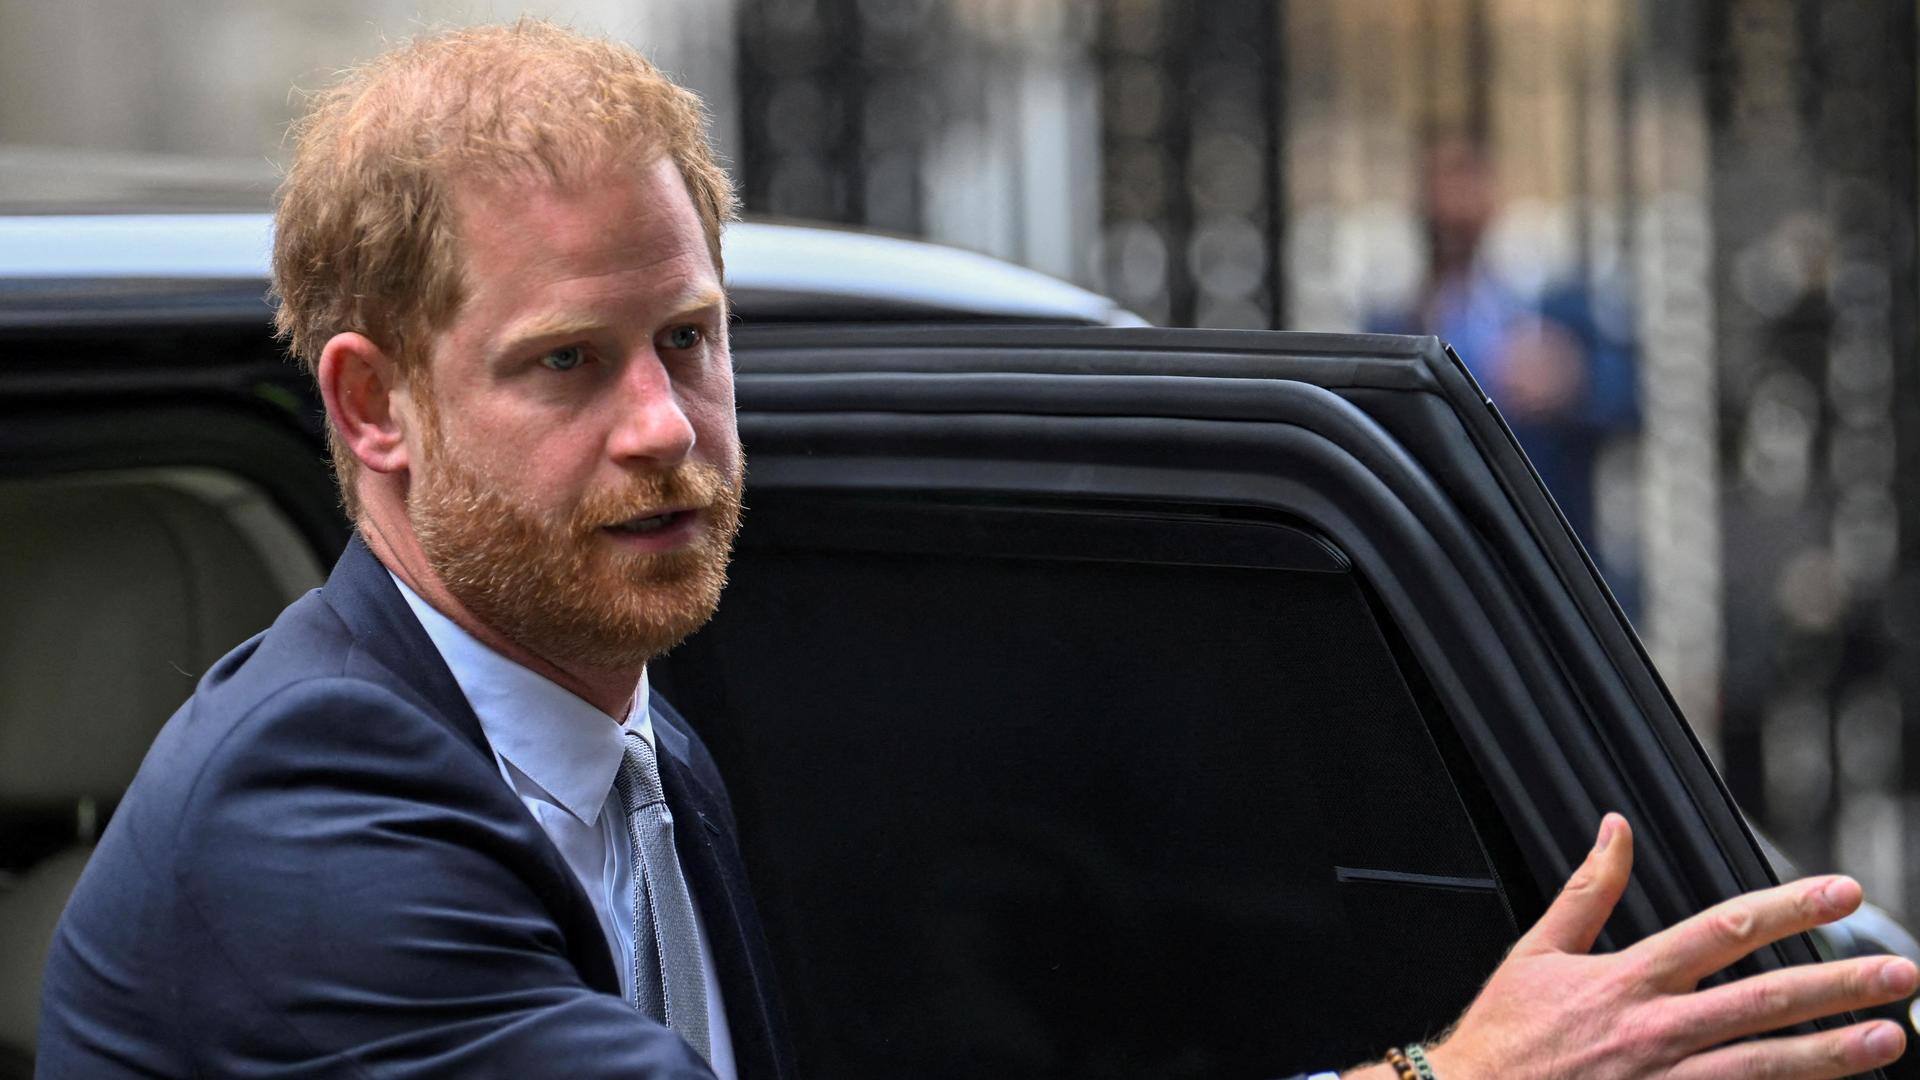 Prince Harry can now pursue legal claim against 'The Sun'